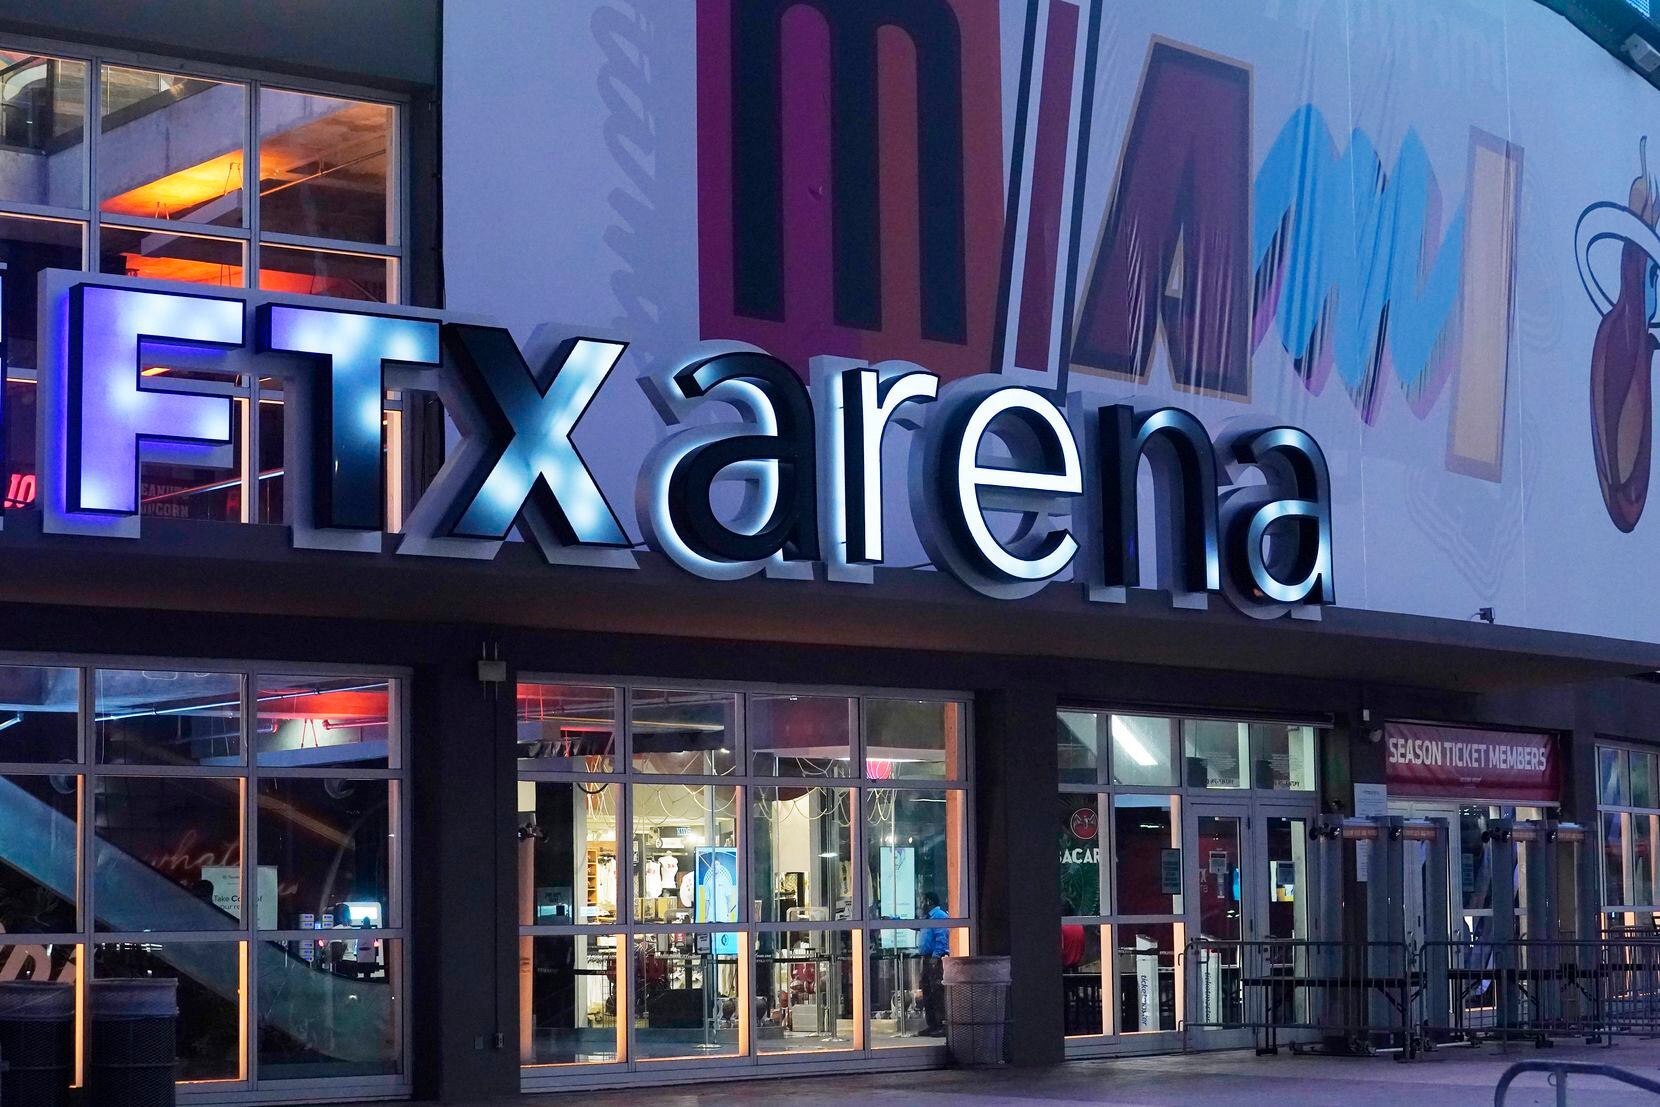 The FTX Arena, where the Miami Heat basketball team plays.  FTX crashed and filed for bankruptcy...